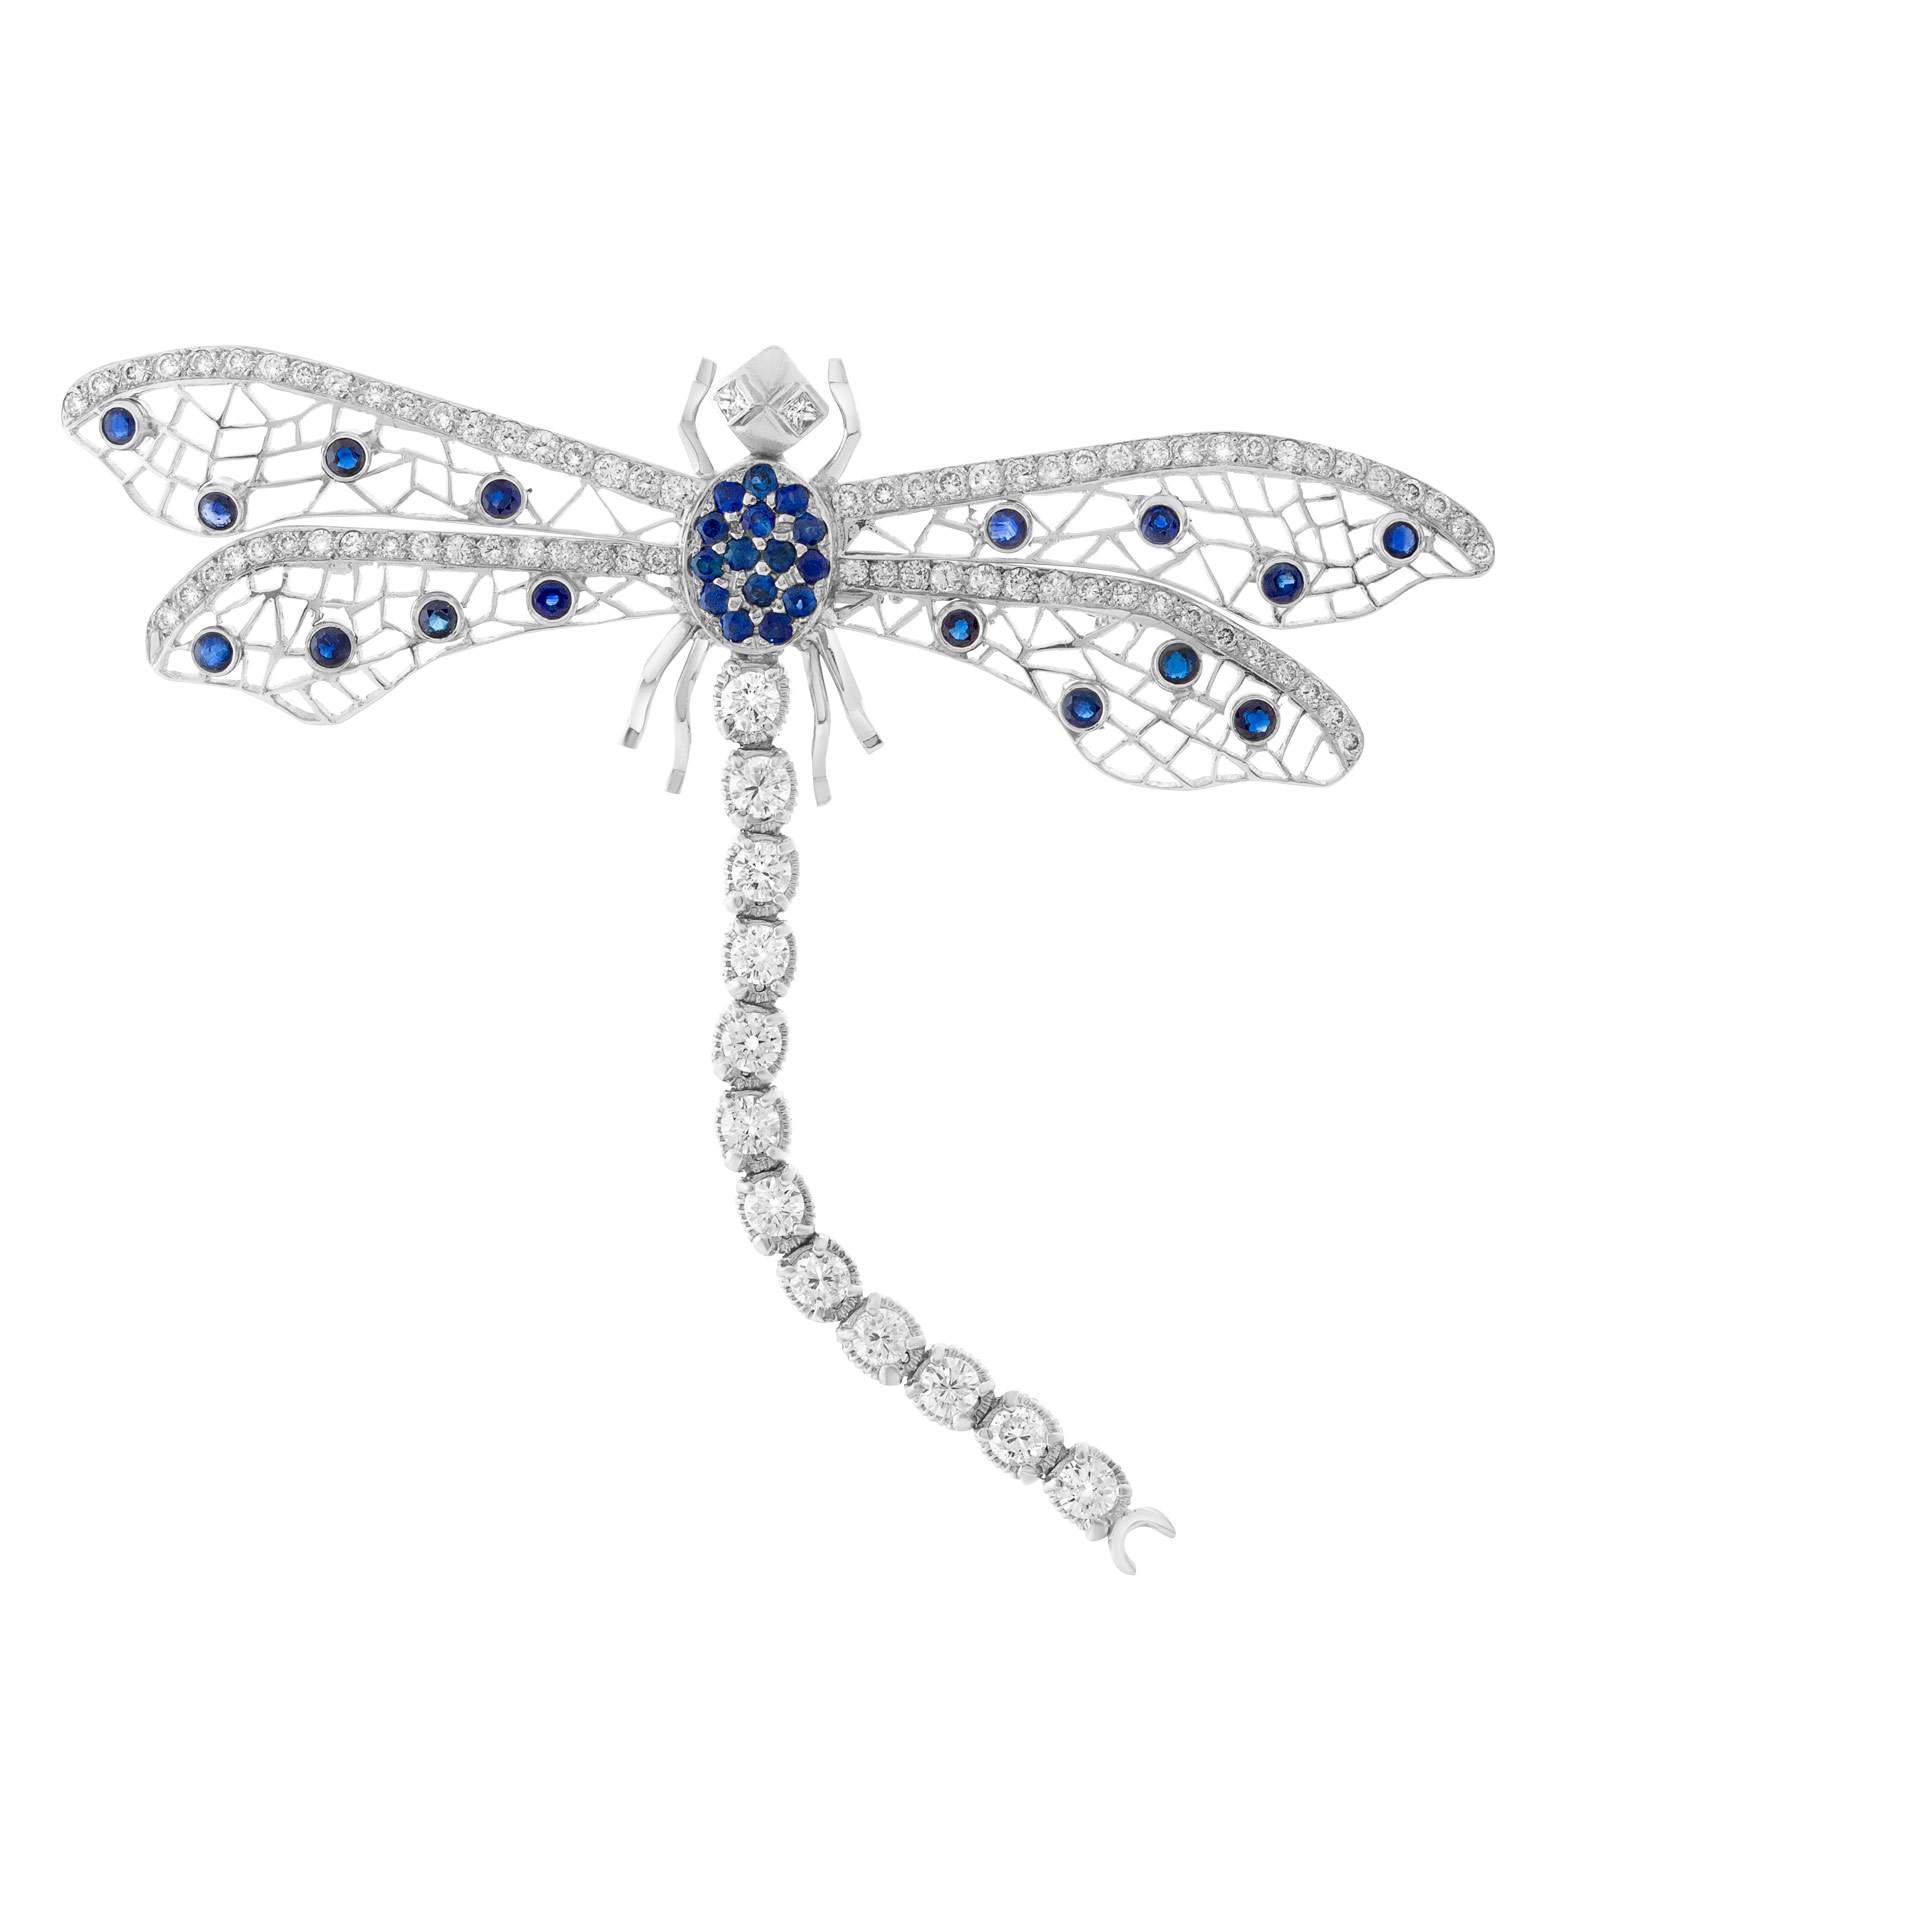 Beautiful dragonfly brooch with 3 carats diamonds ( (G-H color, VS clarity) and 1.5 carat blue sapphires